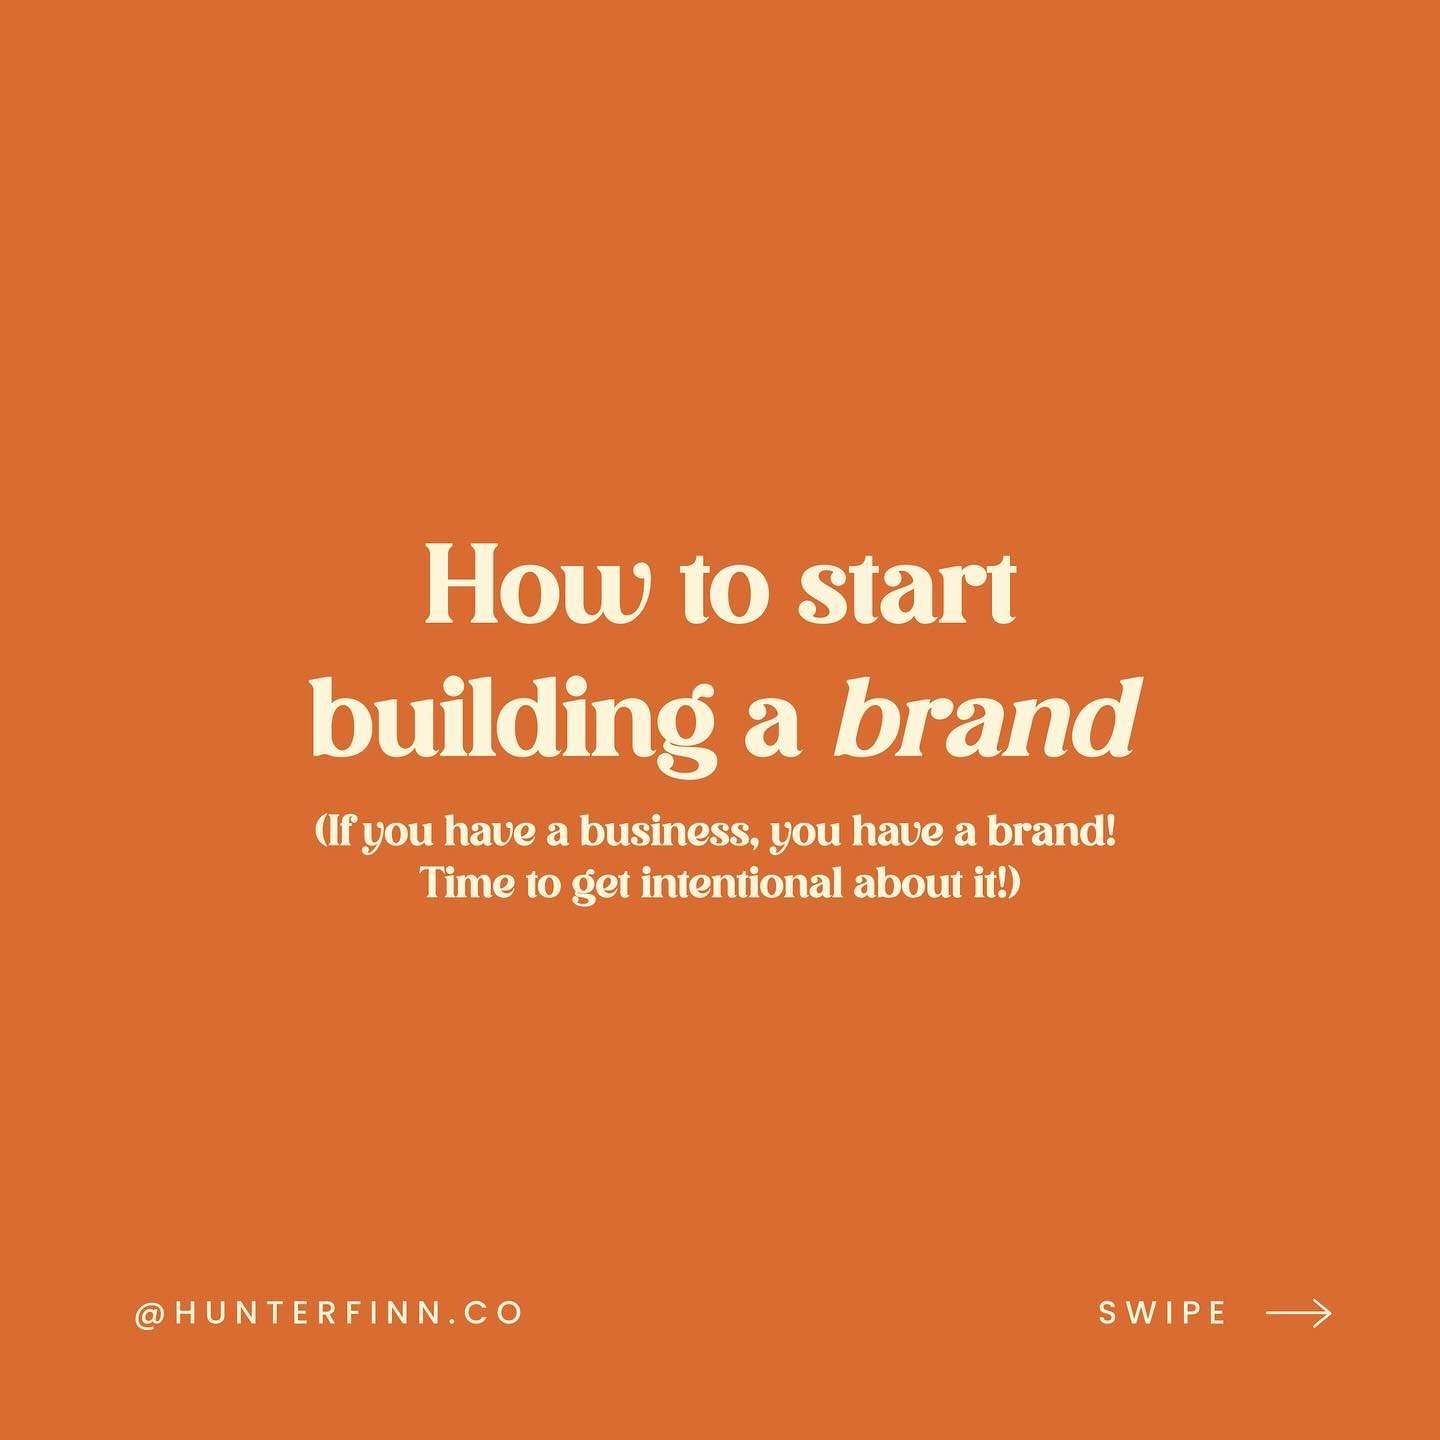 If you have a business, you have a brand! 
Even if you didn&rsquo;t know it! 

So congrats! 

As you&rsquo;ve been building out your business, you&rsquo;ve also been building your brand! 

Your brand is more than your brand-ing. 

Your brand is the p